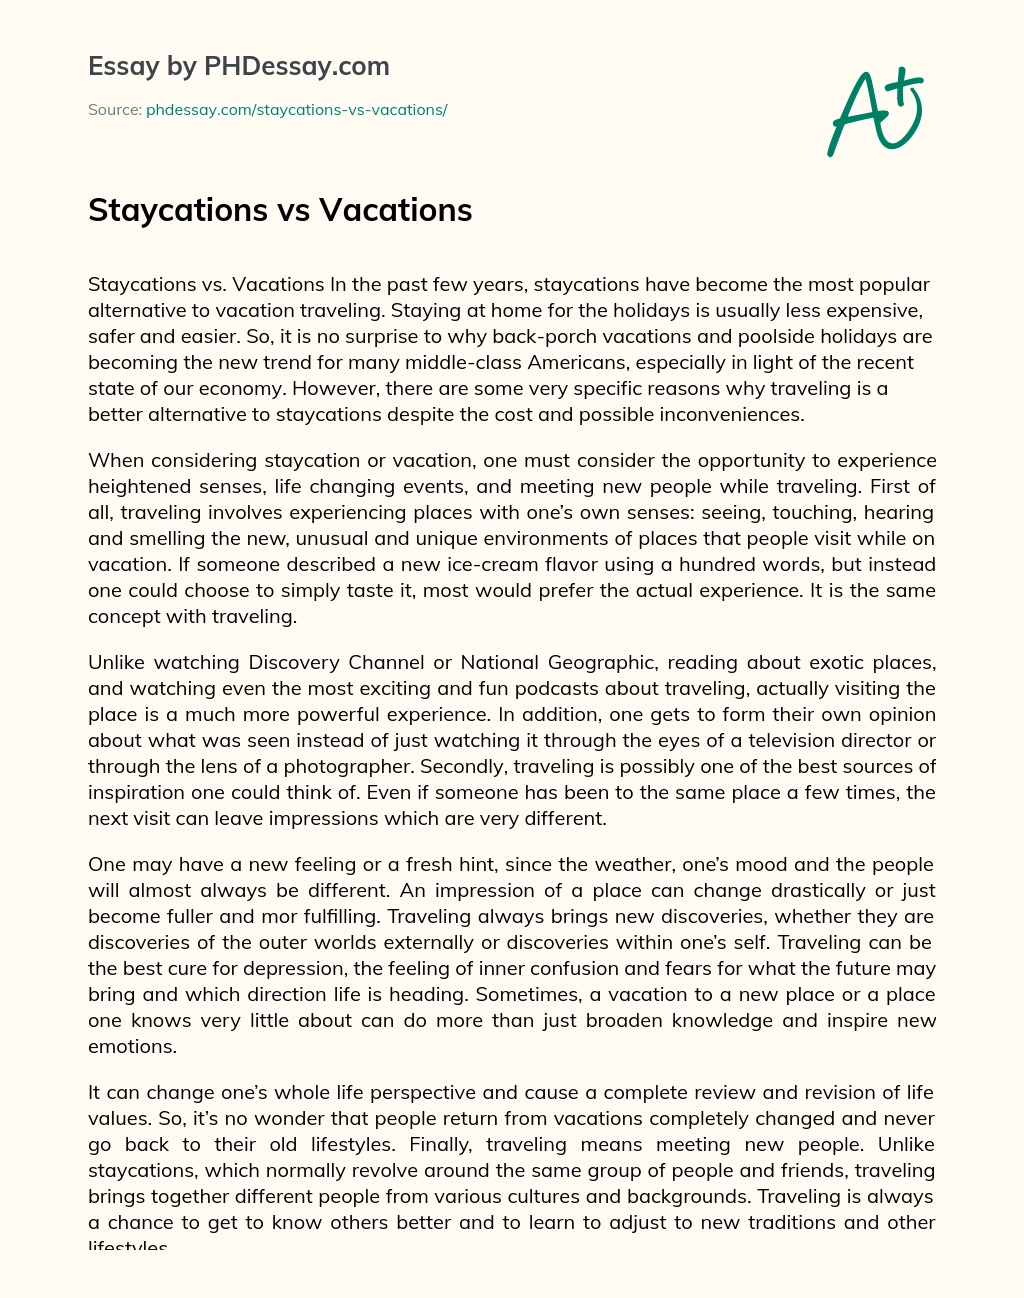 Staycations vs Vacations essay